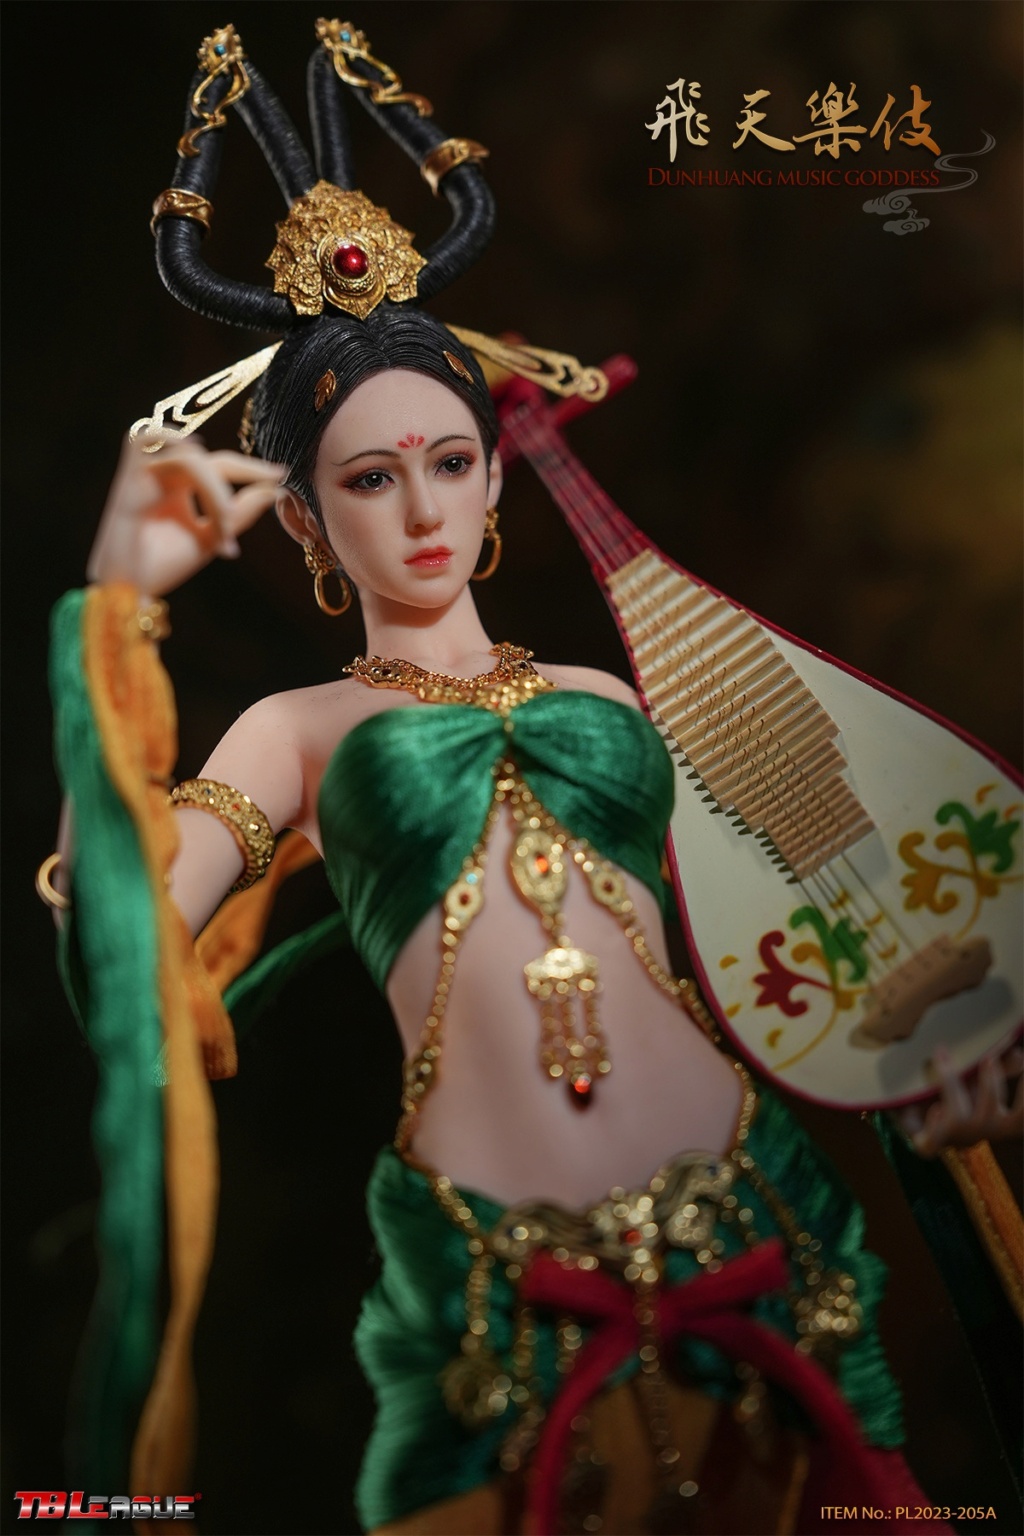 Female - NEW PRODUCT: TBLeague: PL2023-205 1/6 Scale Dunhuang Music Goddess (2 versions) 15121311